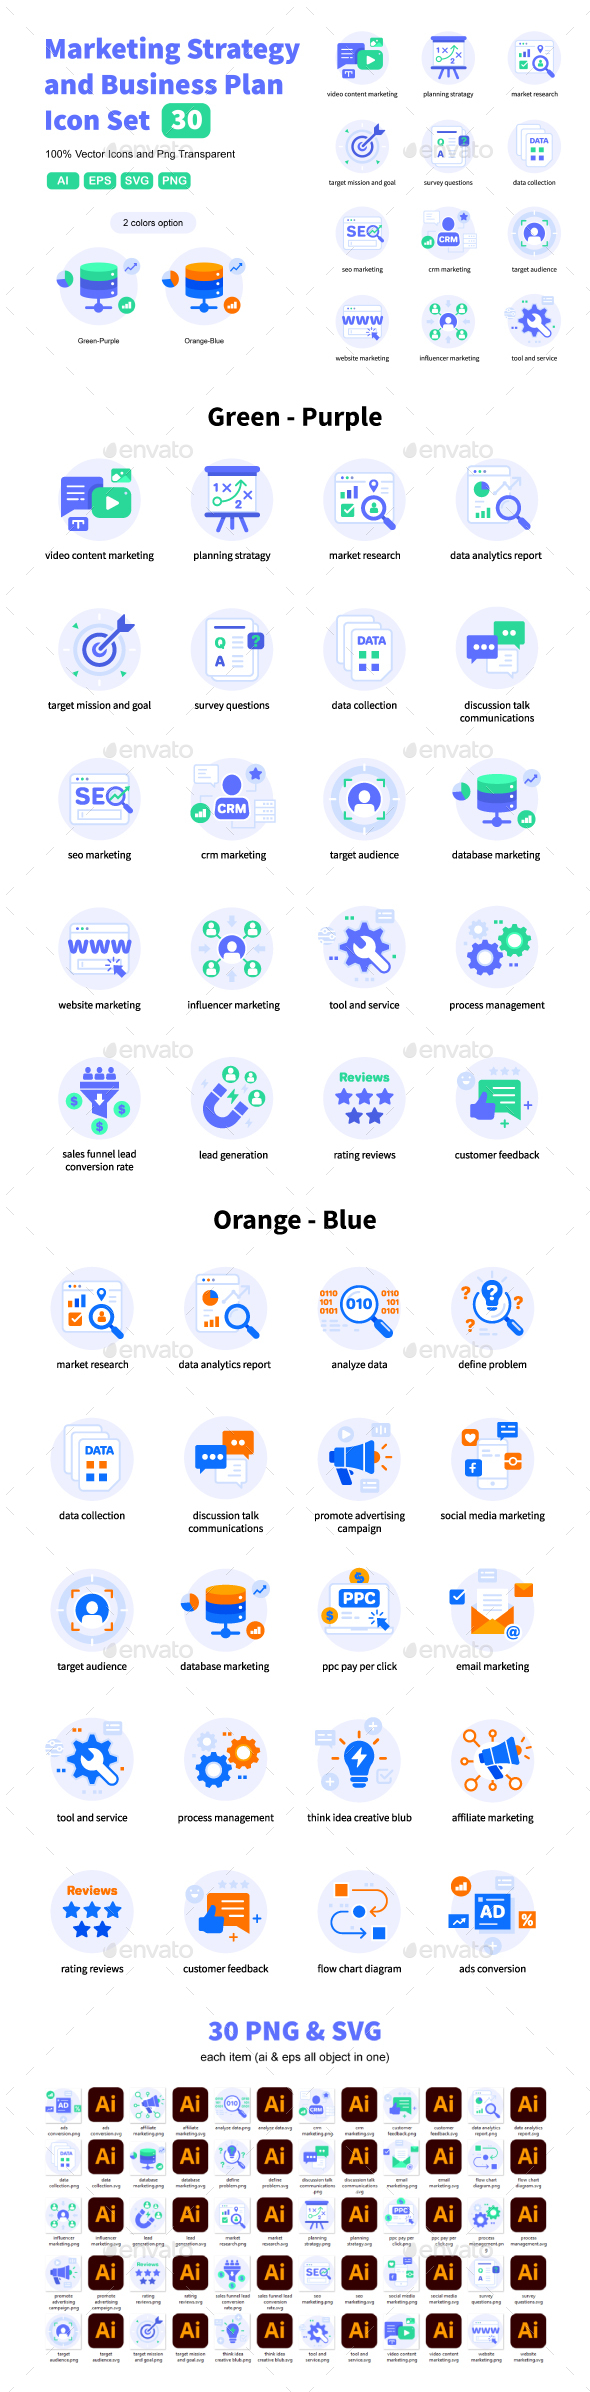 Marketing Strategy and Business Plan Icon Set